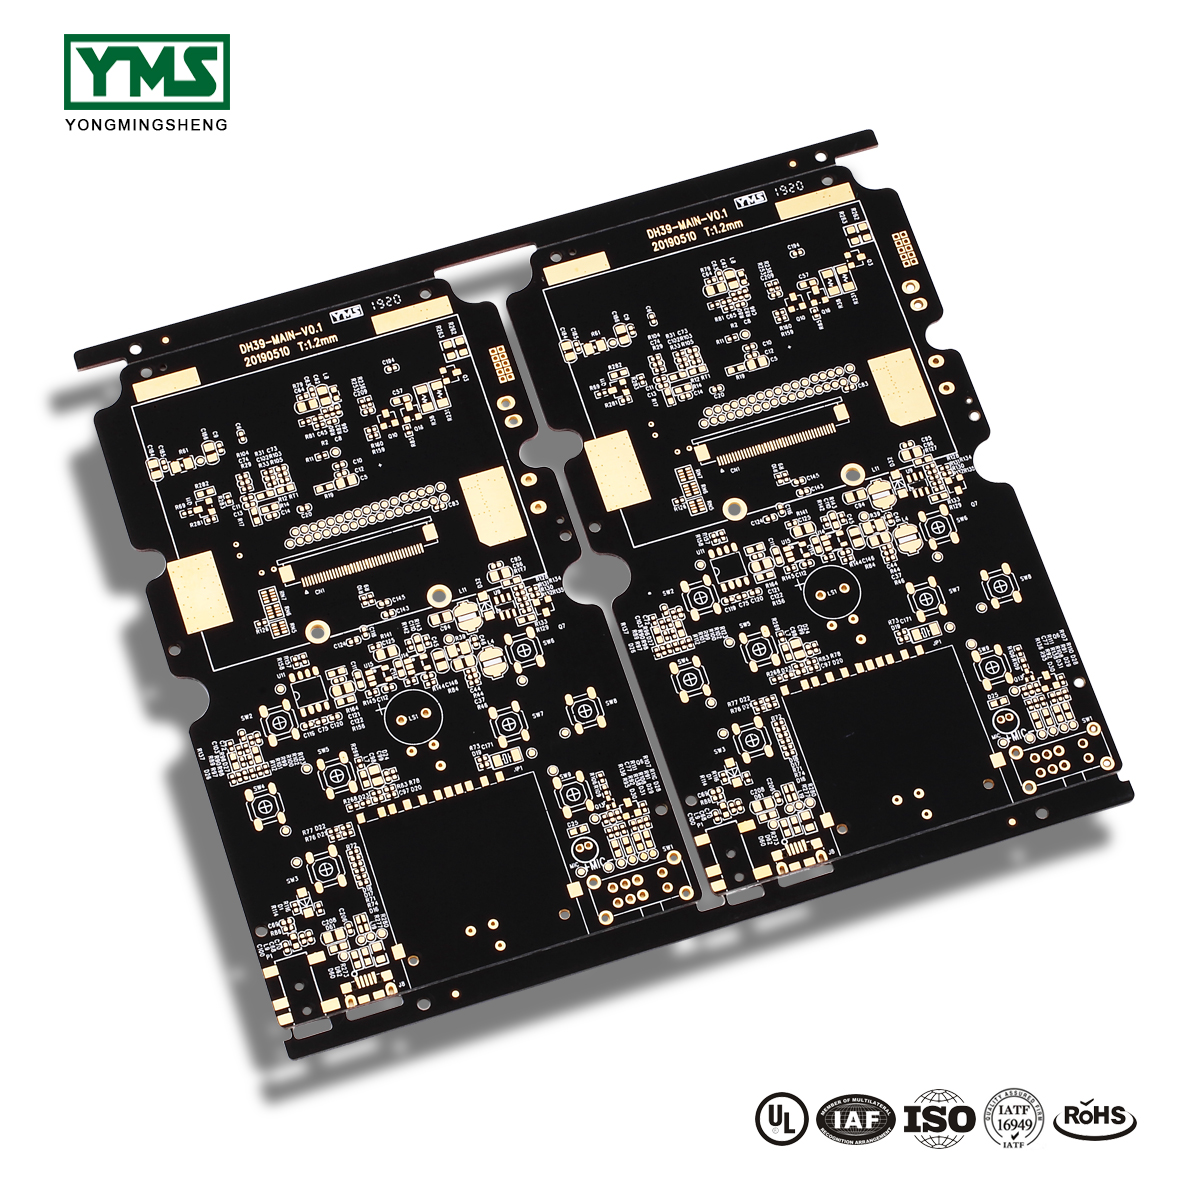 Factory Supply Super Thick Pcb - YMS offers Rapid PCB Prototyping for Your Research Work – Yongmingsheng